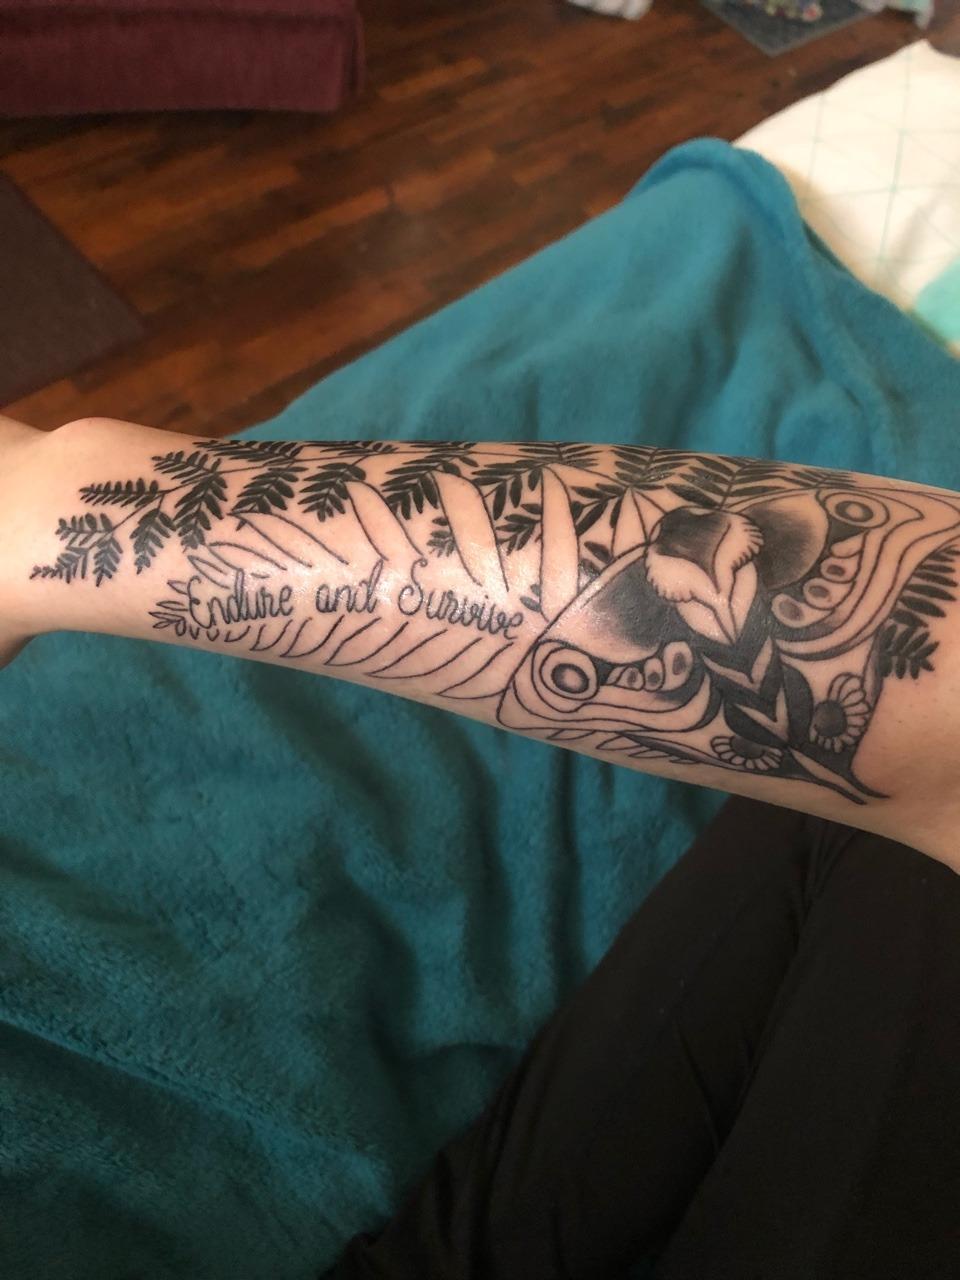 I Got Ellie's Tattoo From The Last of Us Part II, Storytime + Pain Rating